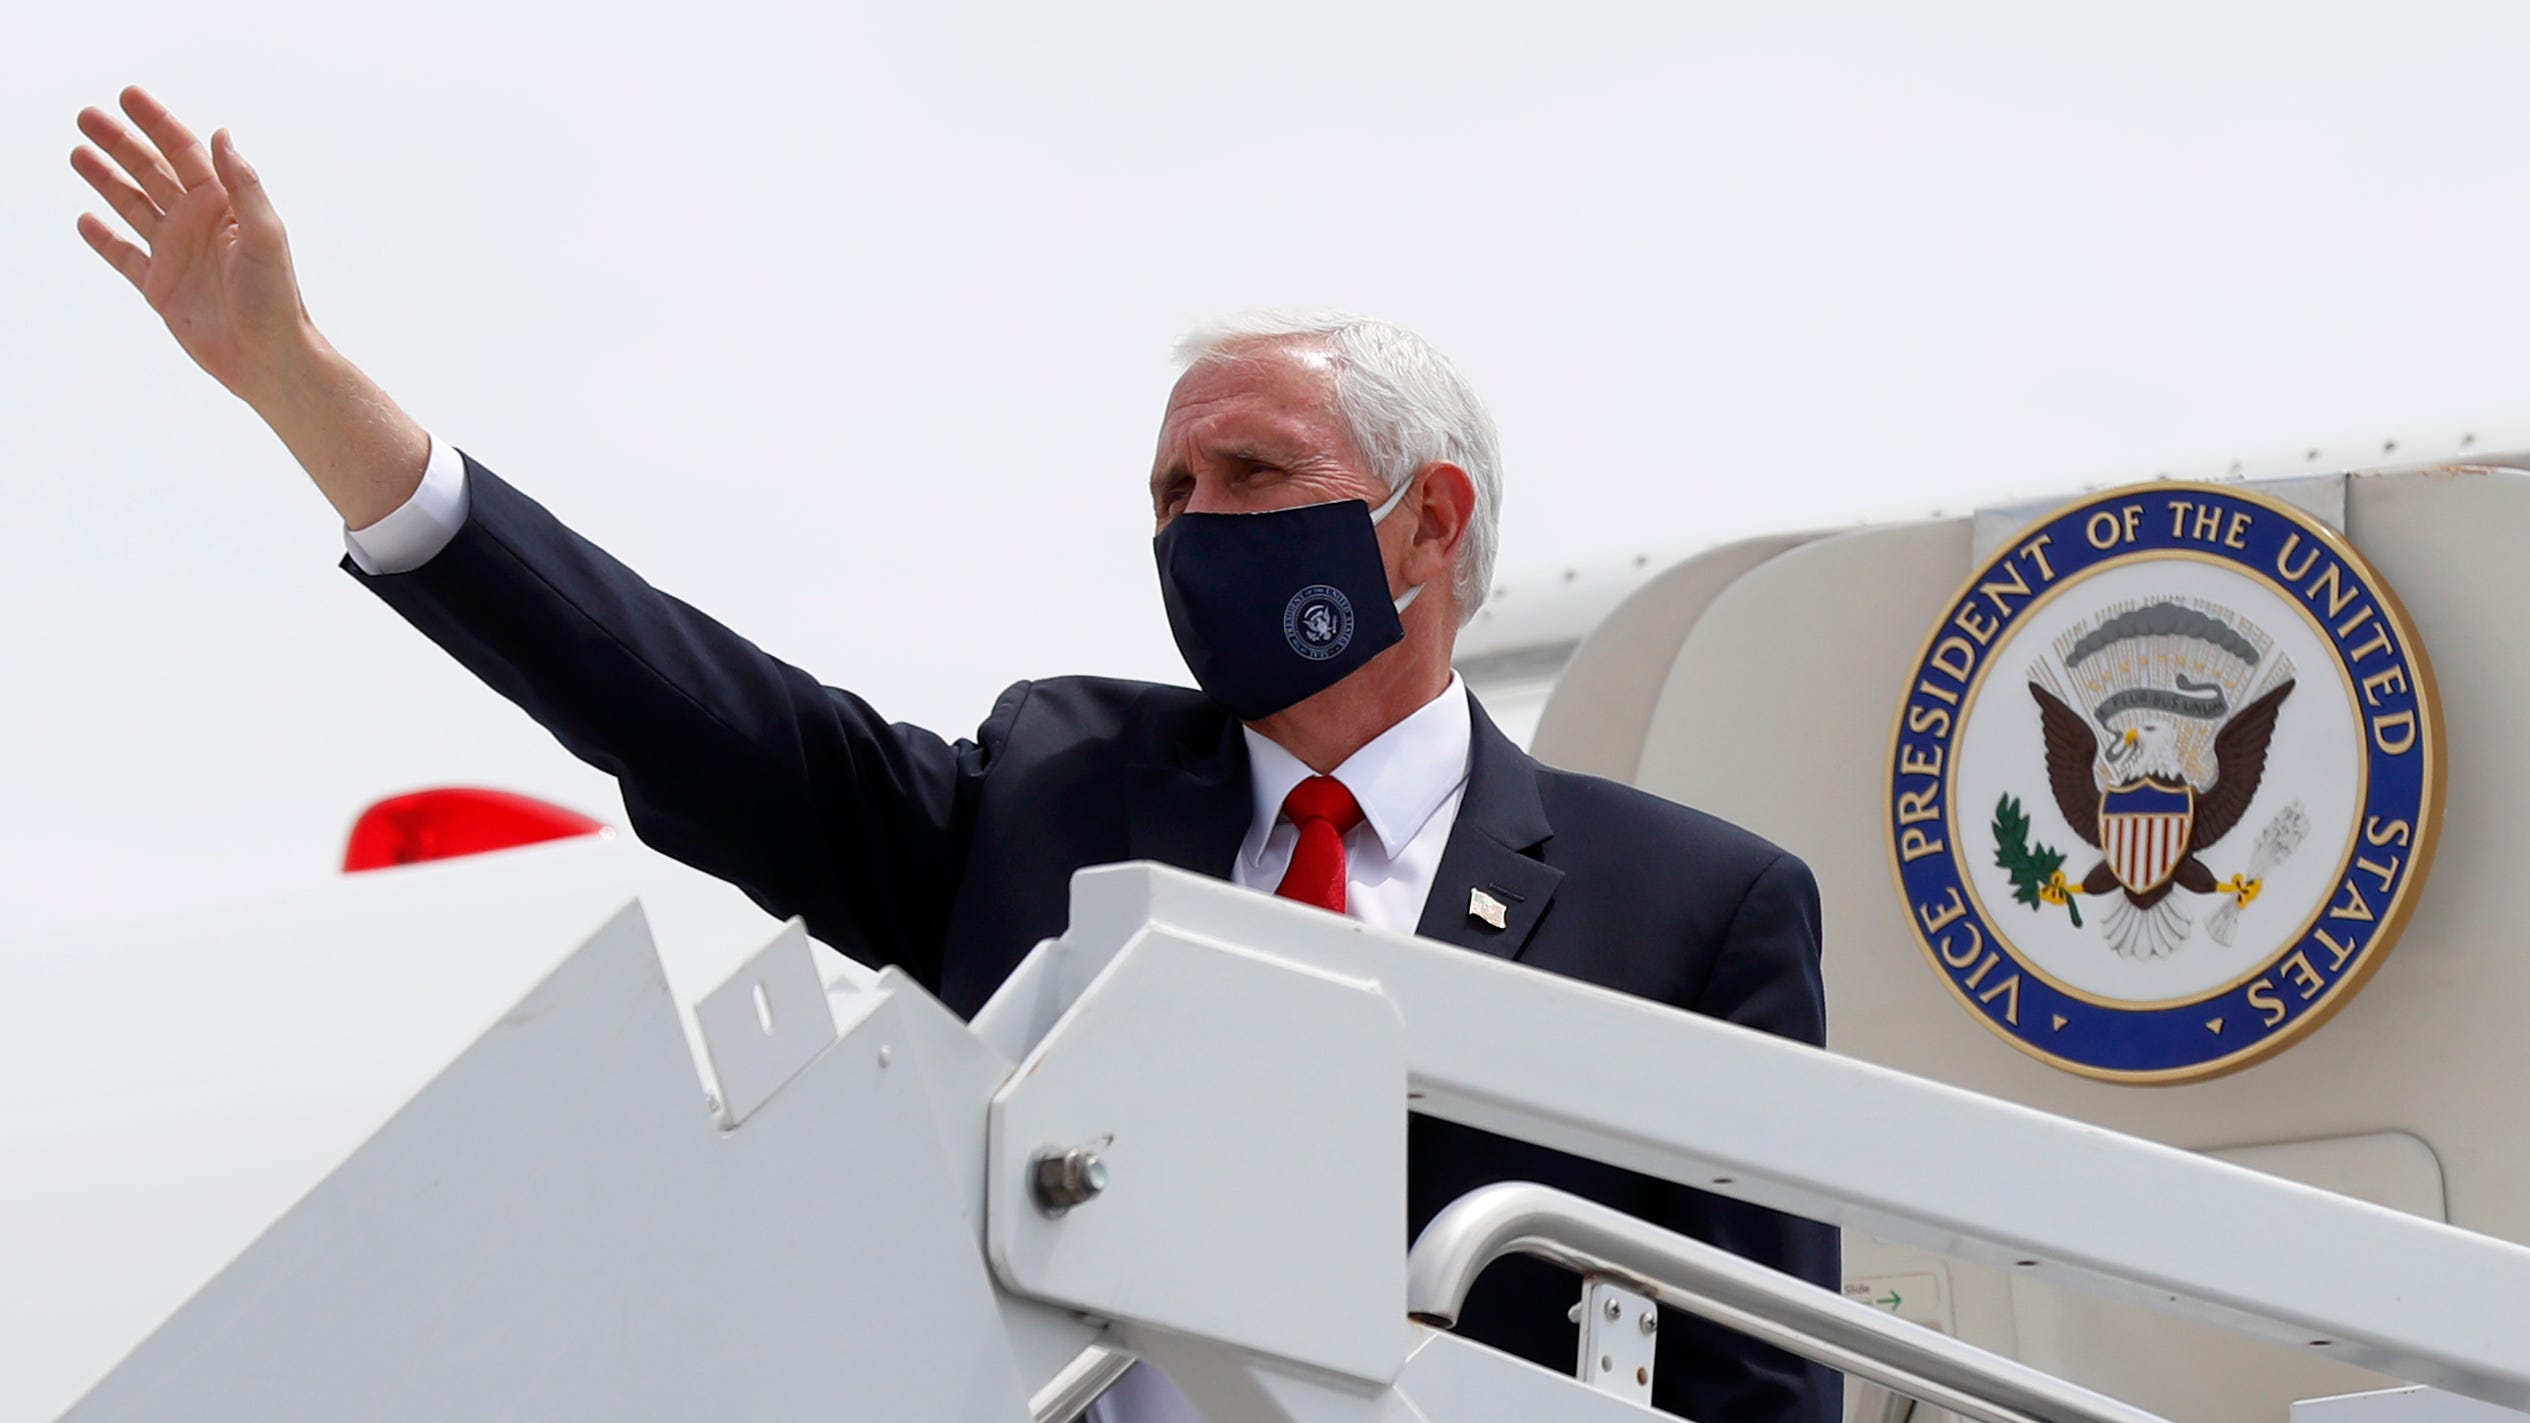 Pence says Trump has shown great 'leadership' during the pandemic. A new poll shows Americans disagree. - USA TODAY